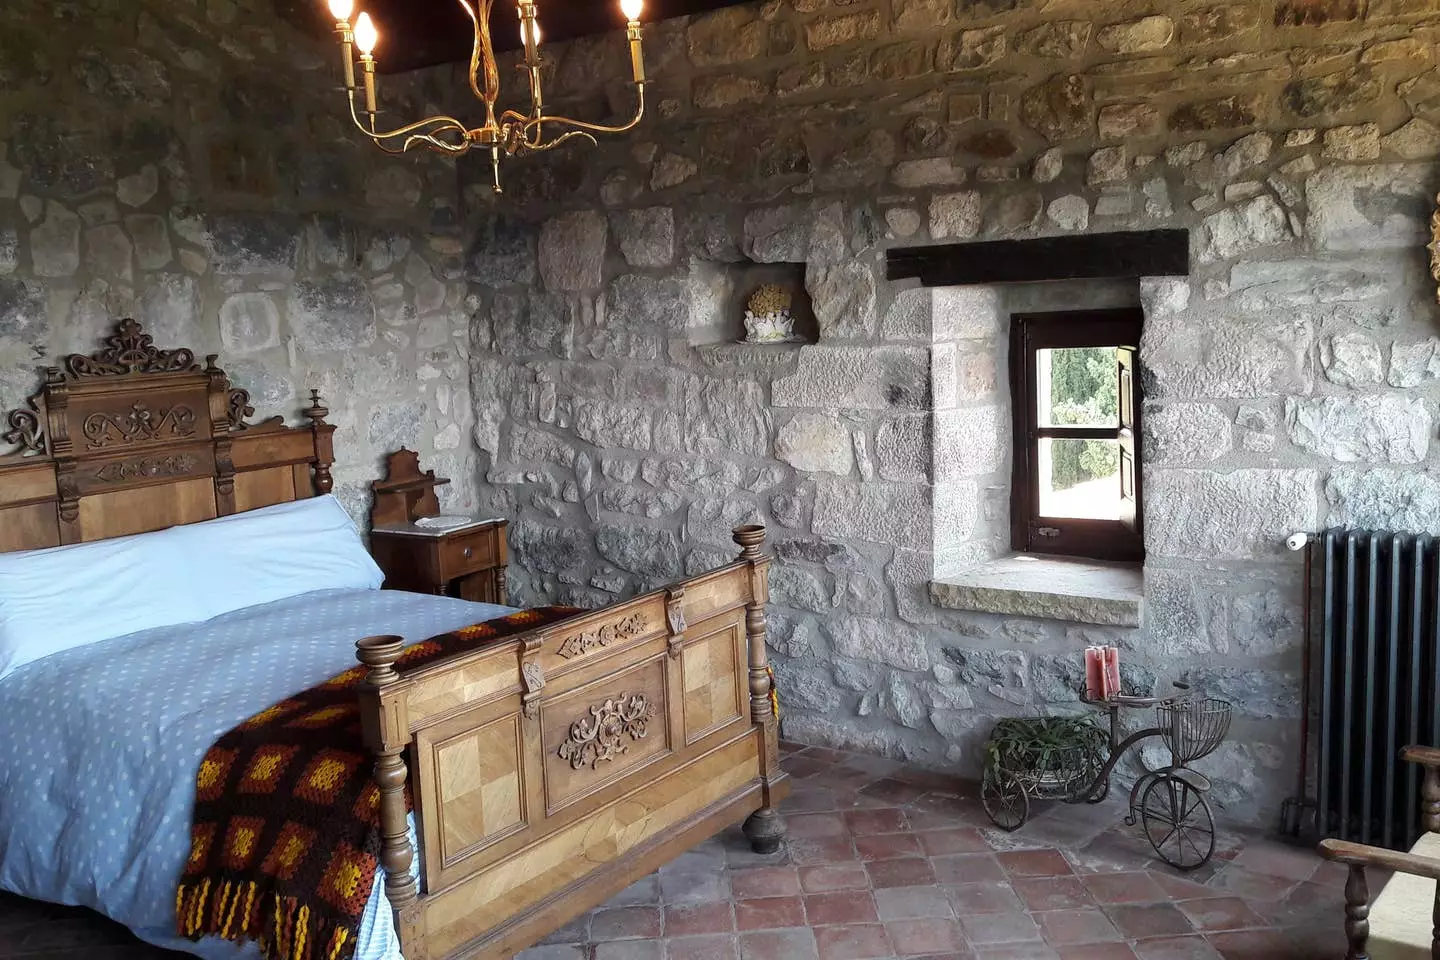 One of the bedrooms in castle Llaés (